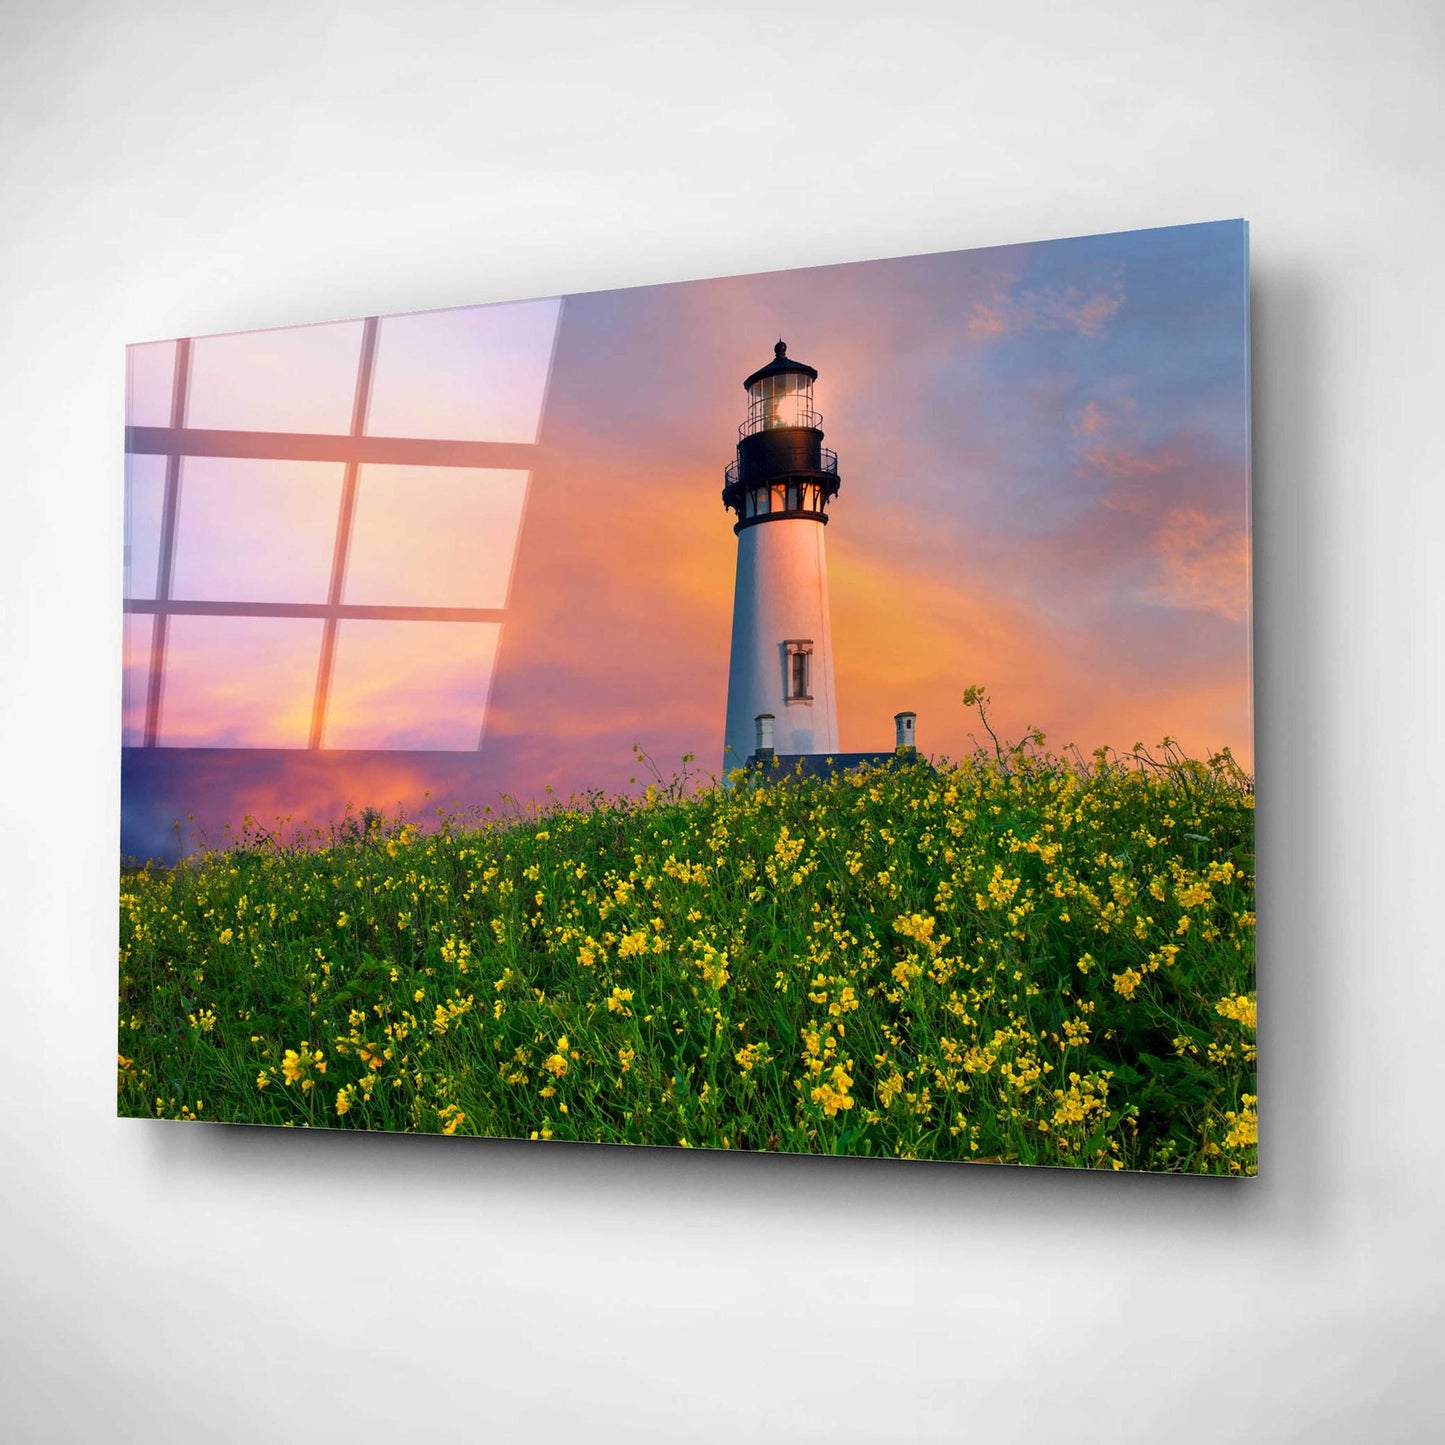 Epic Art 'Lighthouse' by Dennis Frates, Acrylic Glass Wall Art,16x12